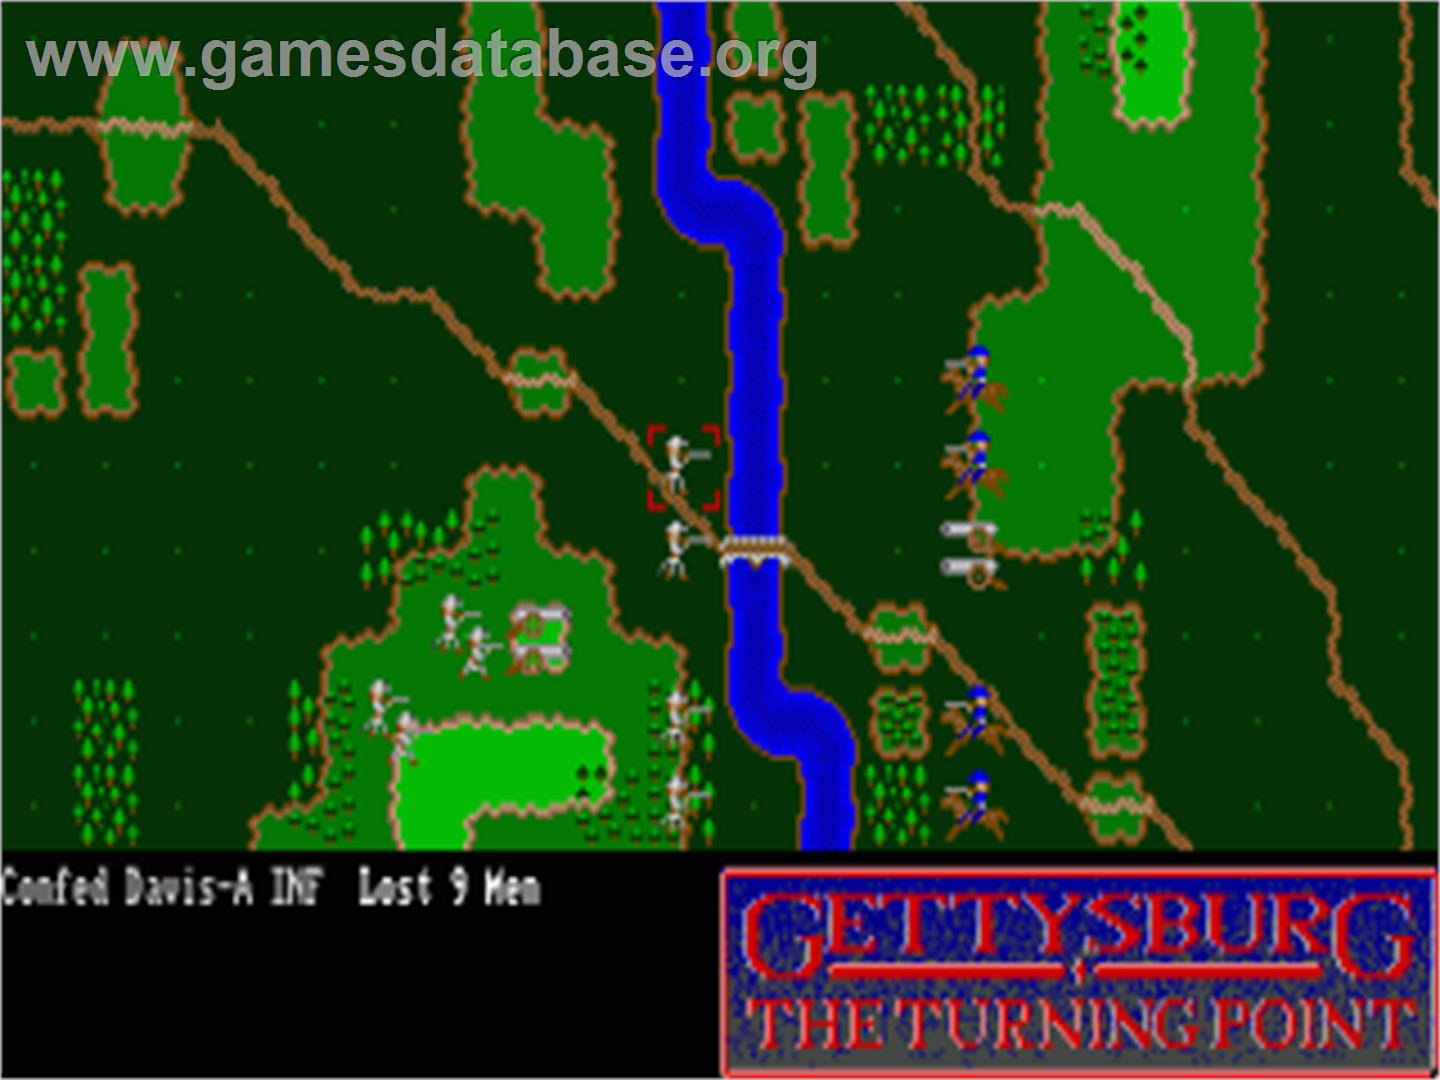 Gettysburg: The Turning Point - Commodore Amiga - Artwork - In Game